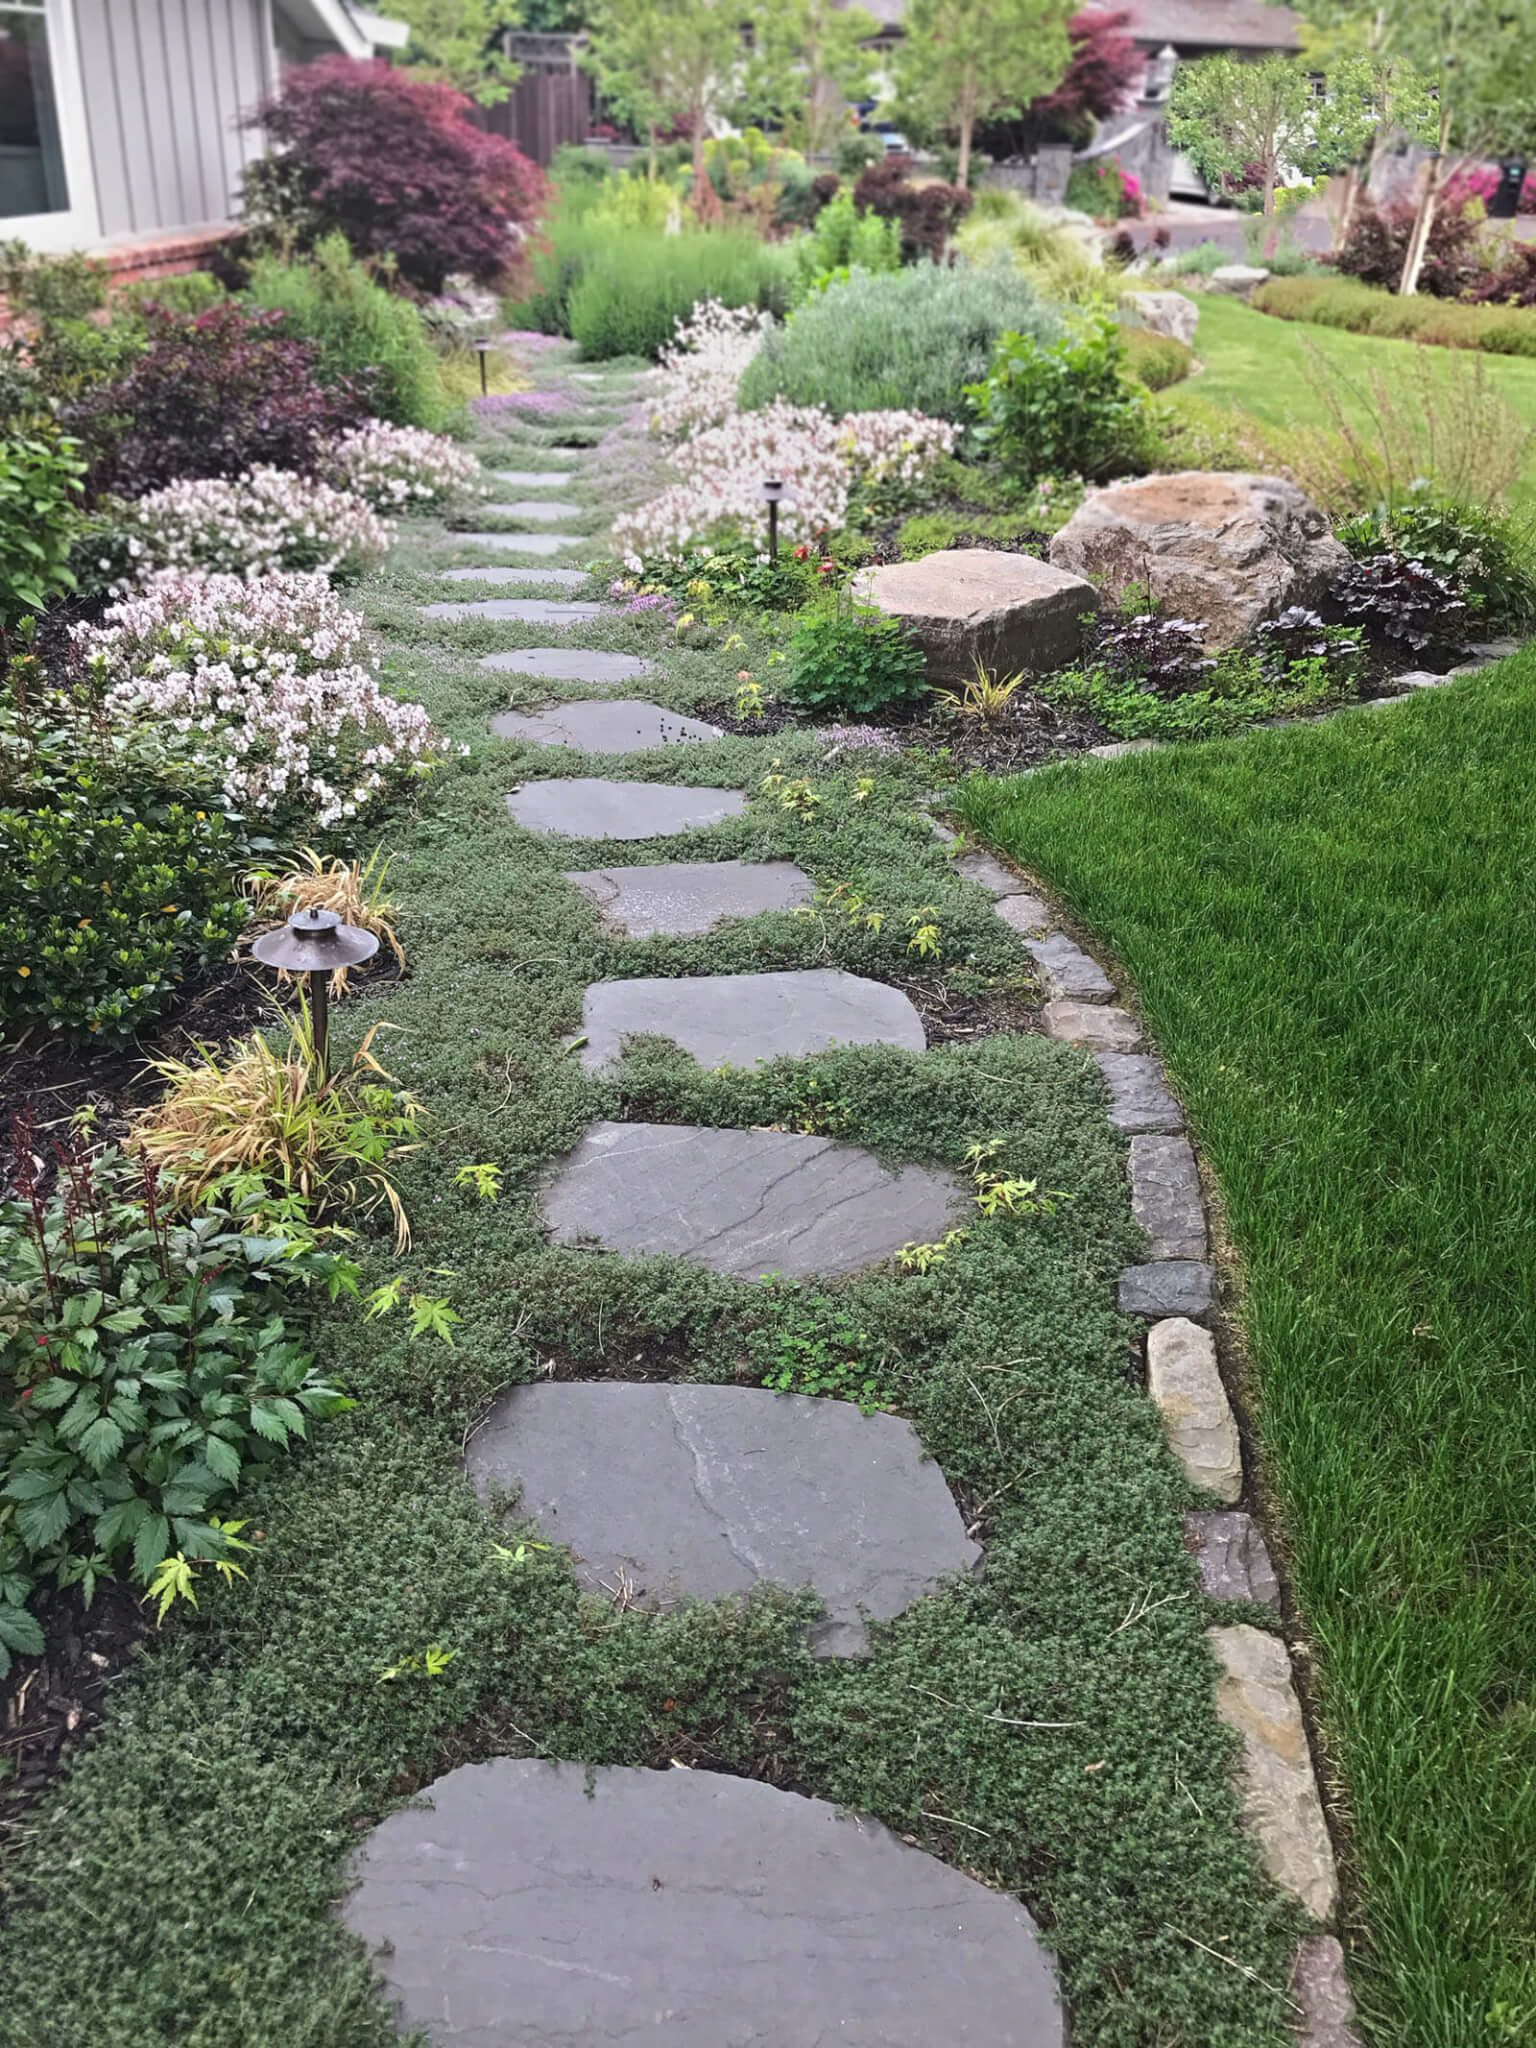 Stepping stone pathway wandering through ground cover and green yard